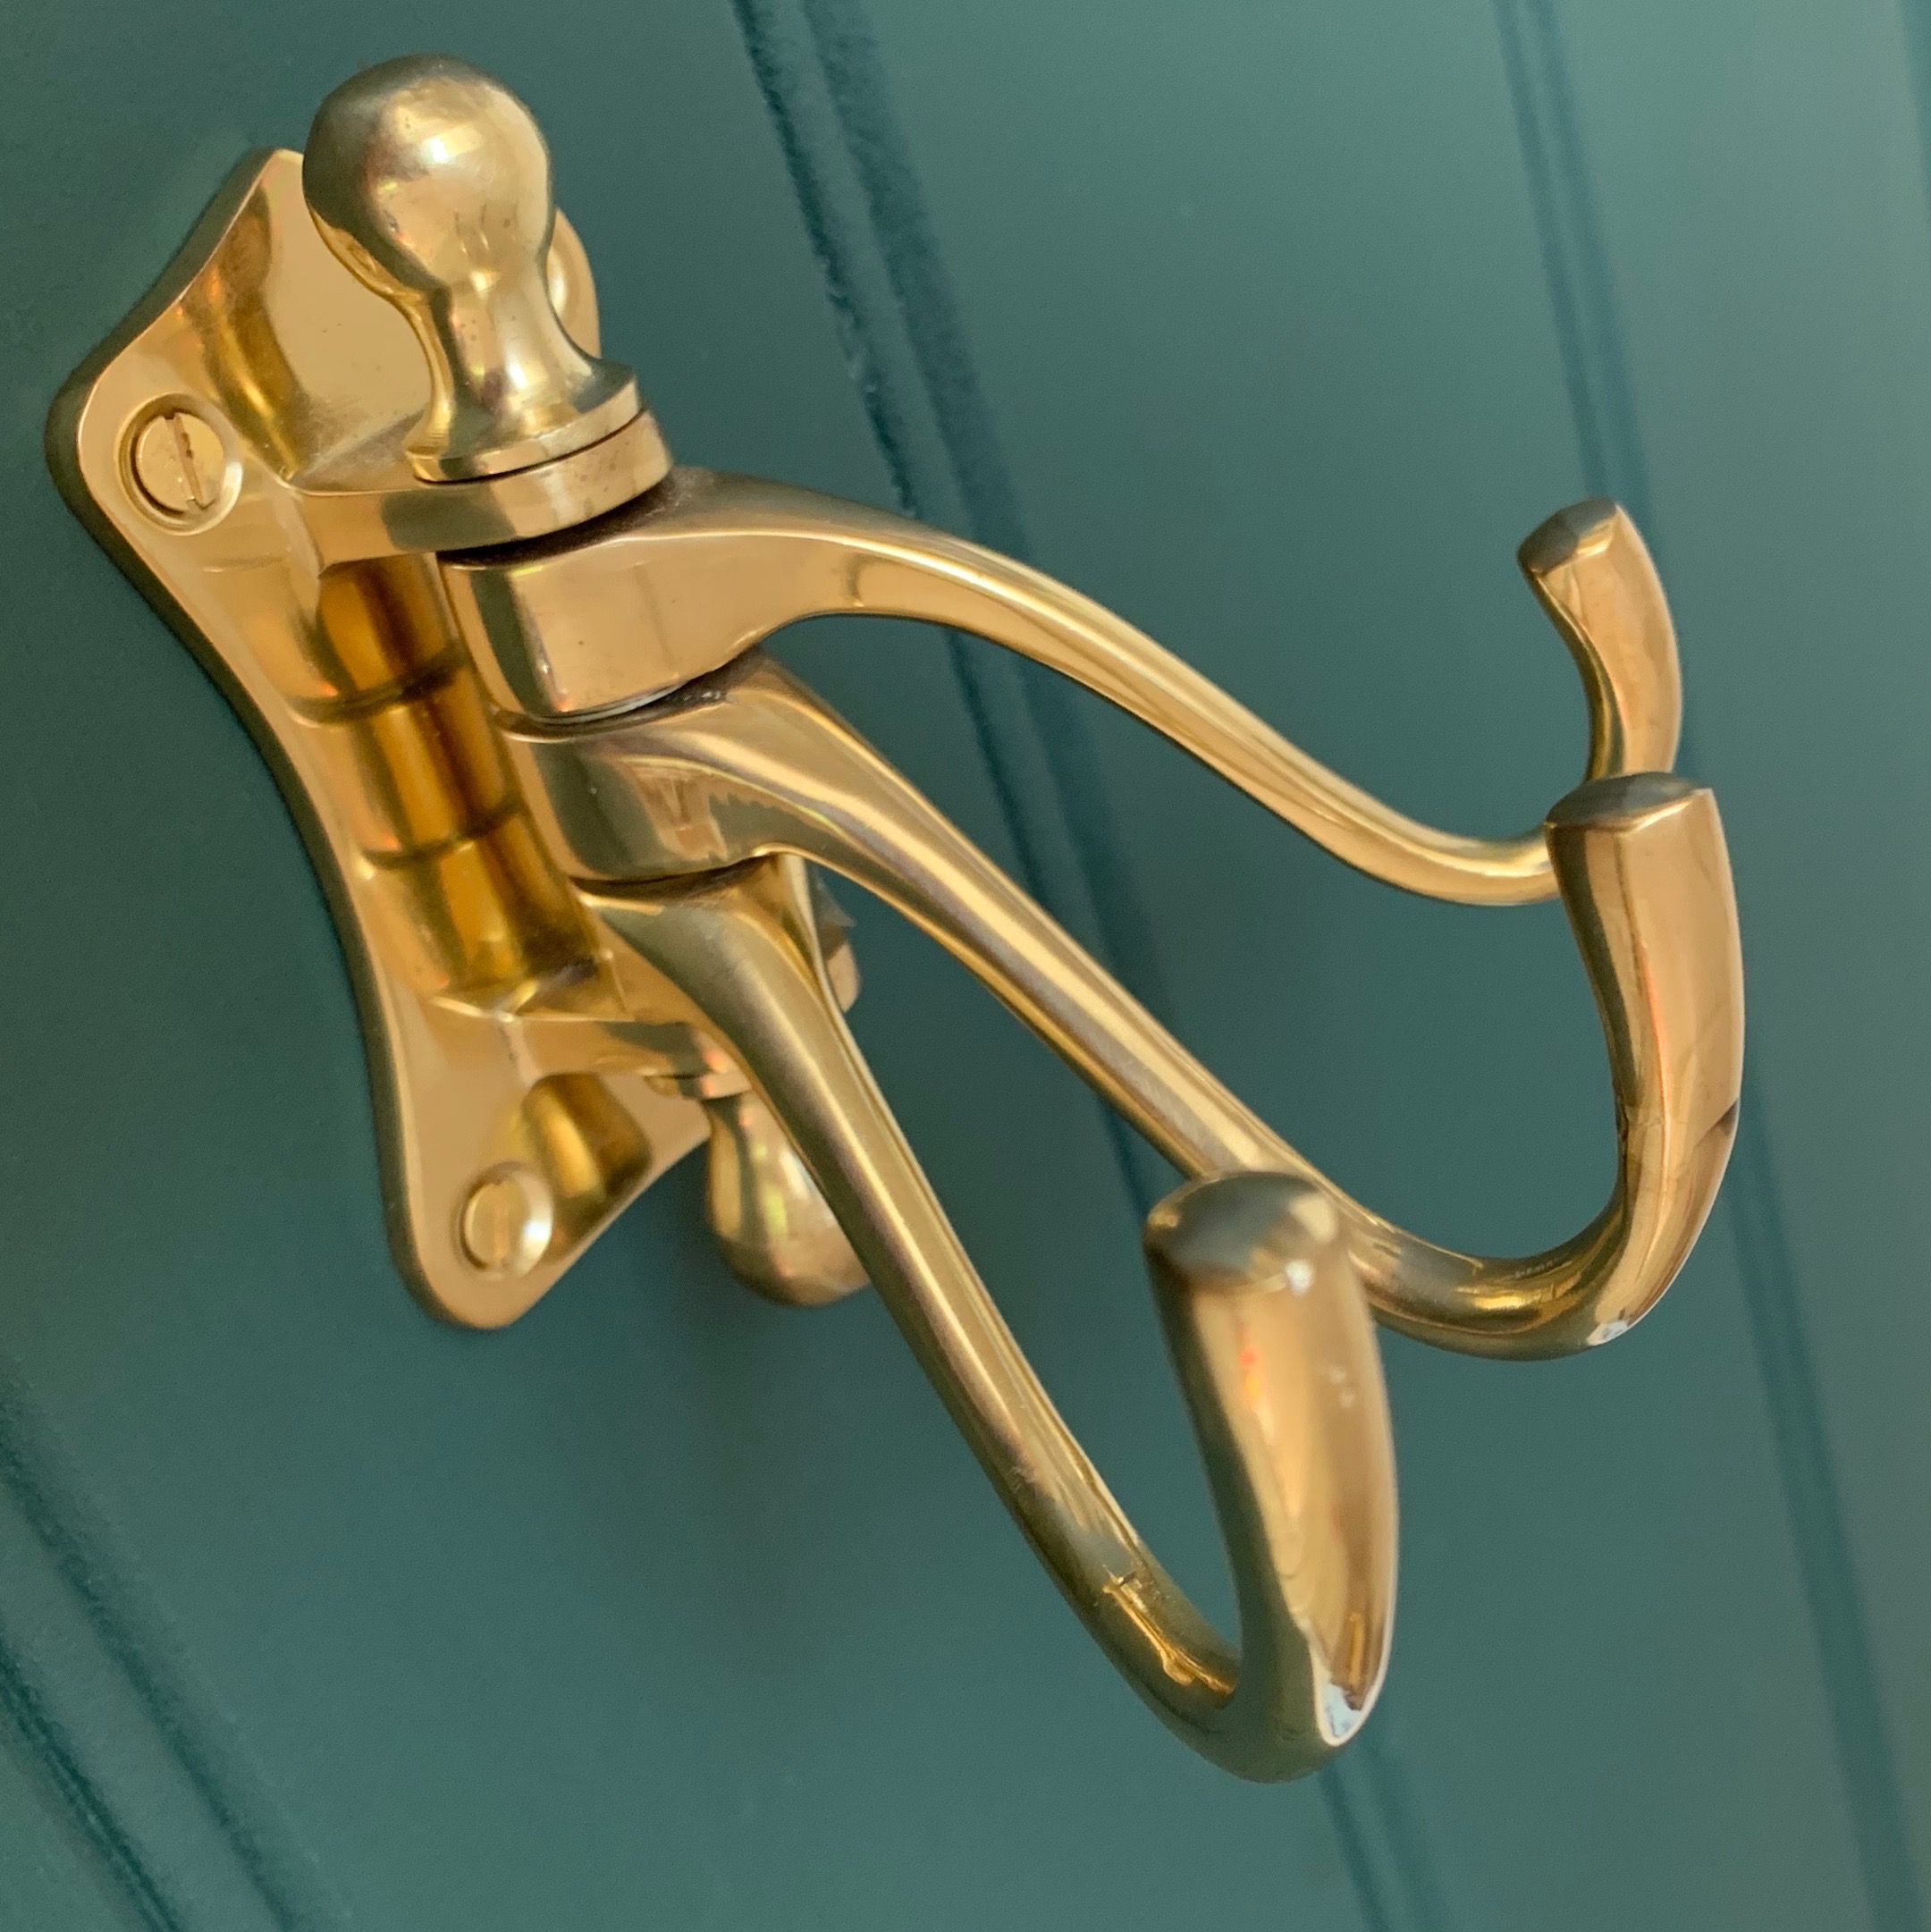 Boliver Edwardian Triple Coat Hook - Period Home Fittings